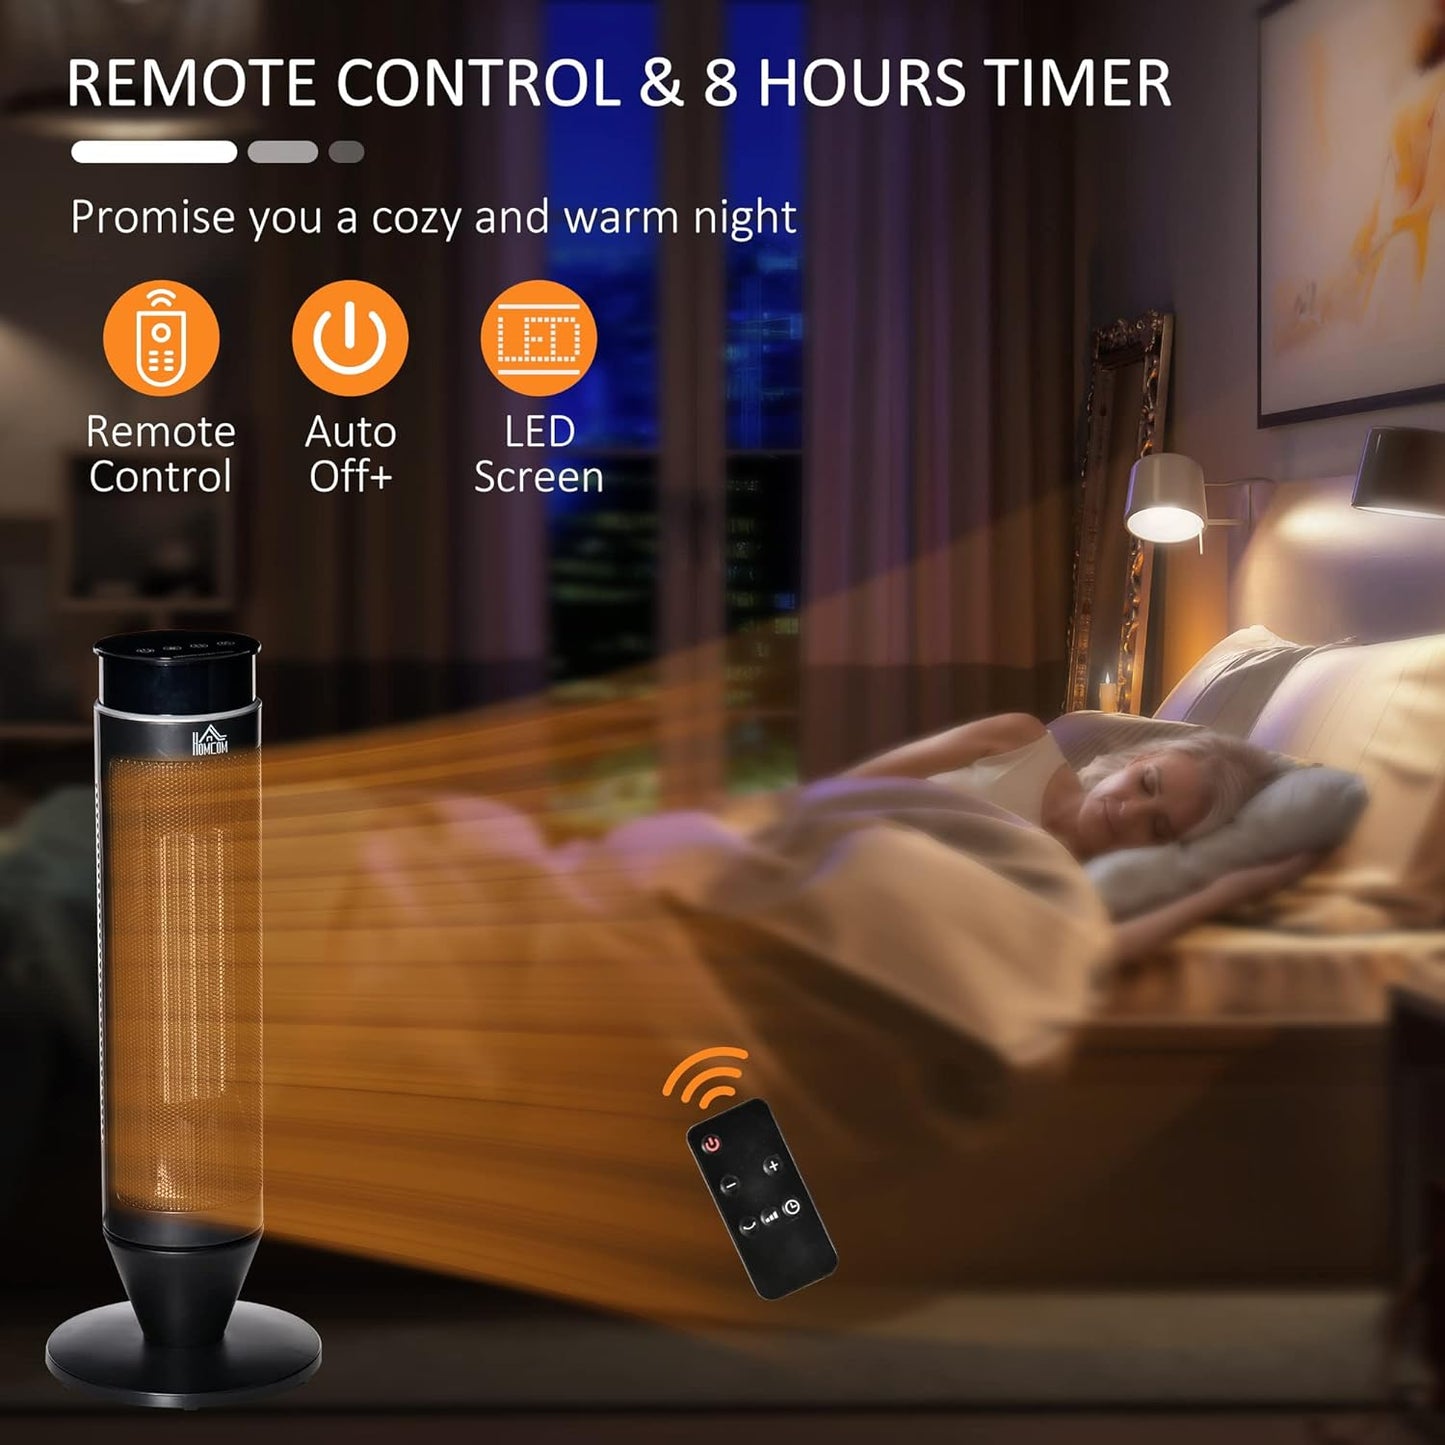 Maplin 42° Oscillation Indoor Ceramic Tower Space Heater with Remote Control & Timer - Black - maplin.co.uk